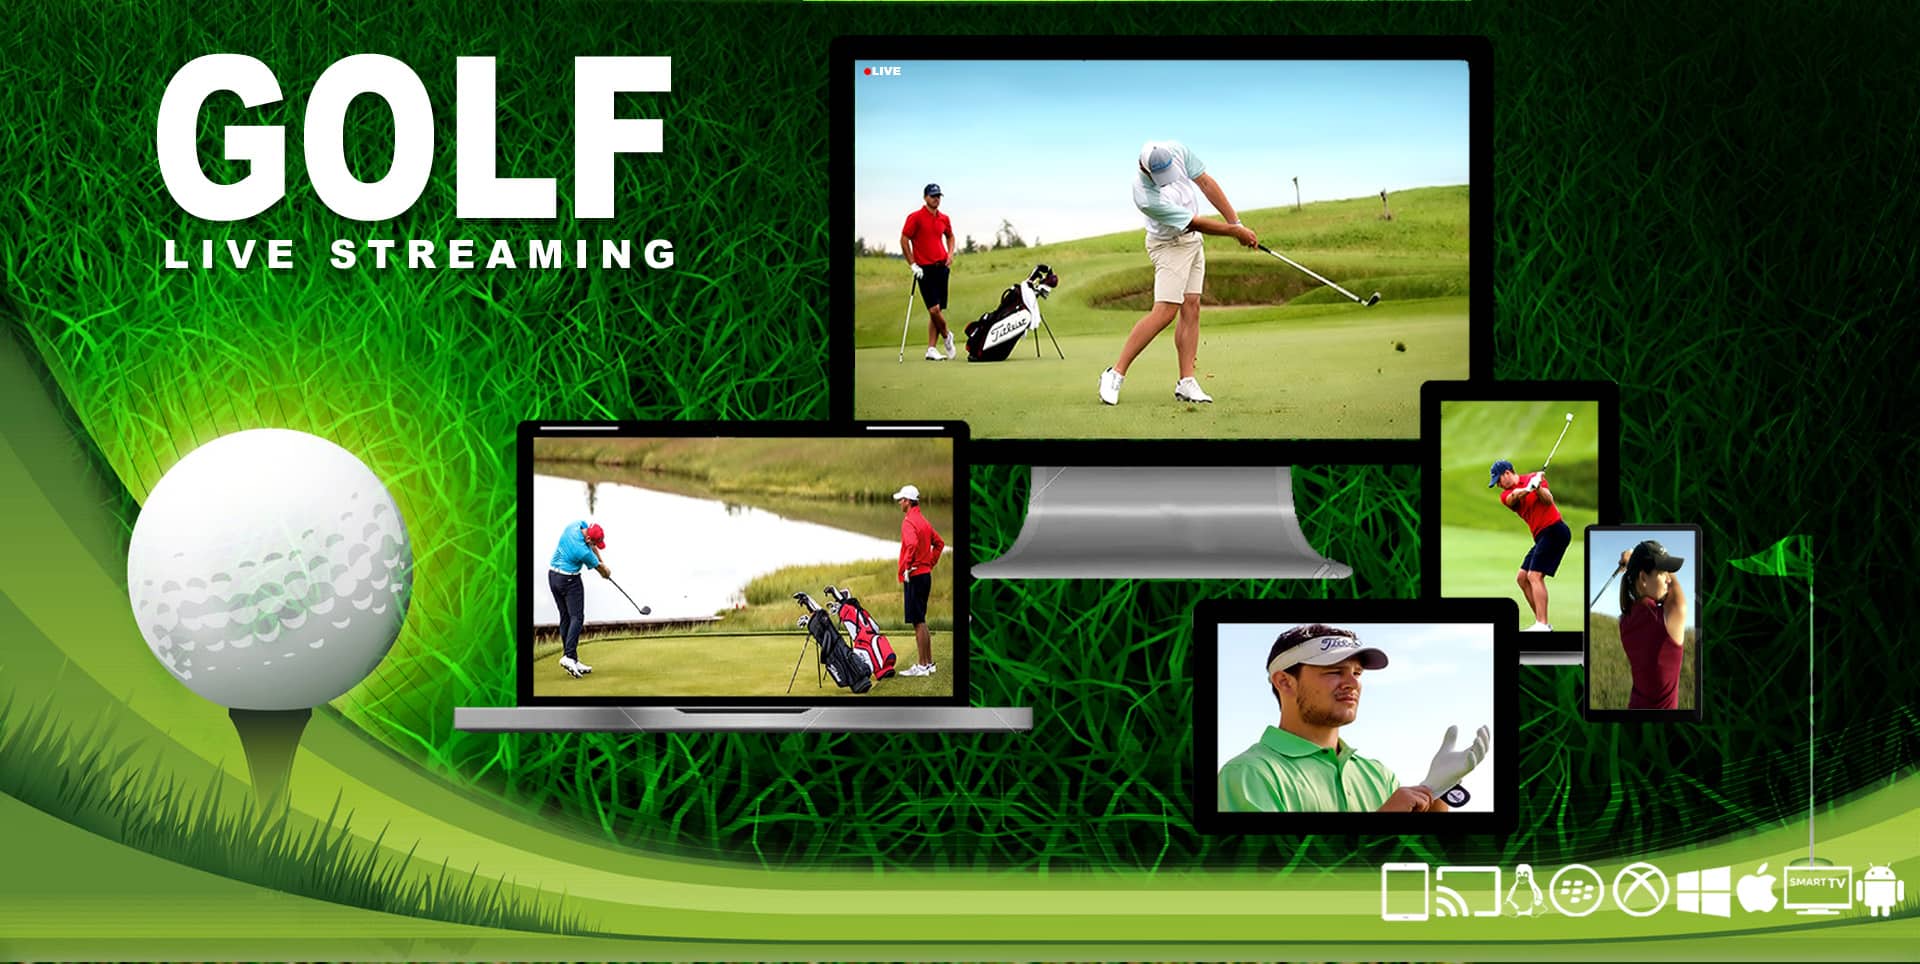 Mayakoba Golf Classic, First Round Live Stream | FBStreams